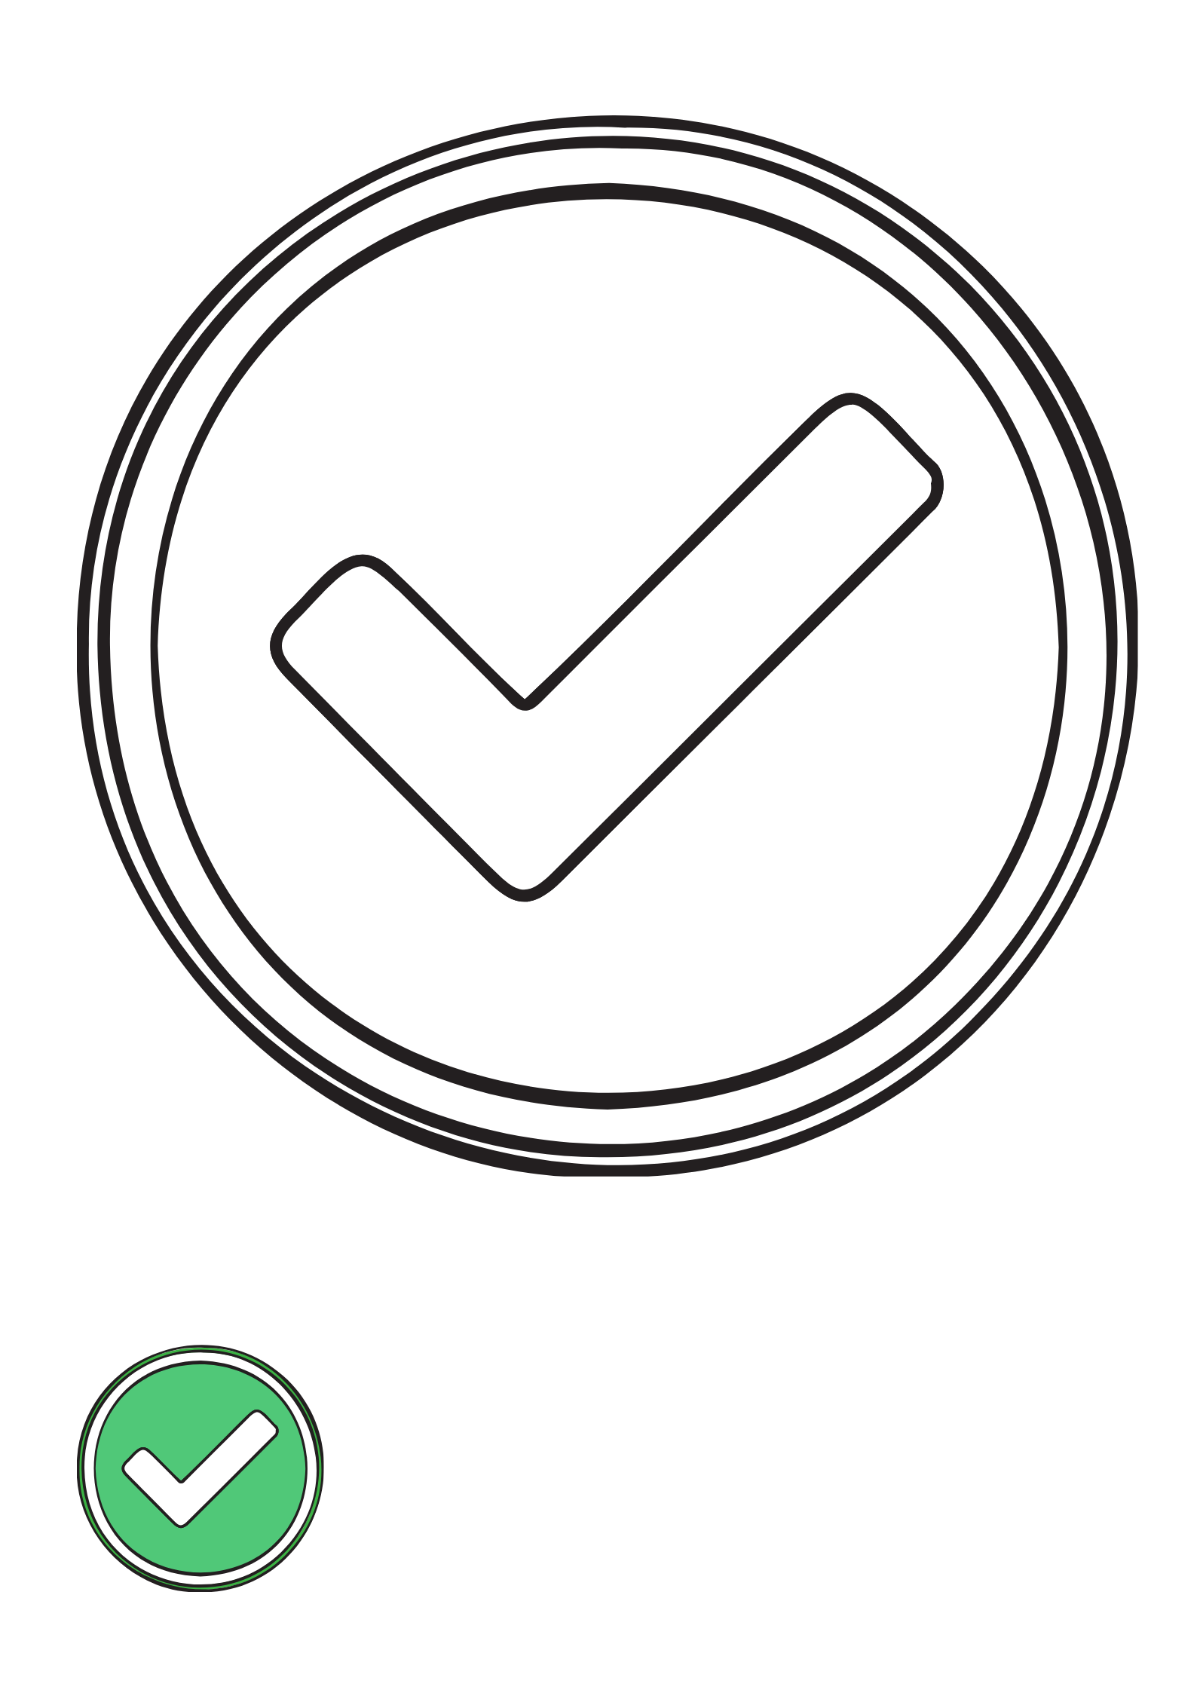 Free Green Tick Mark Coloring Page Template